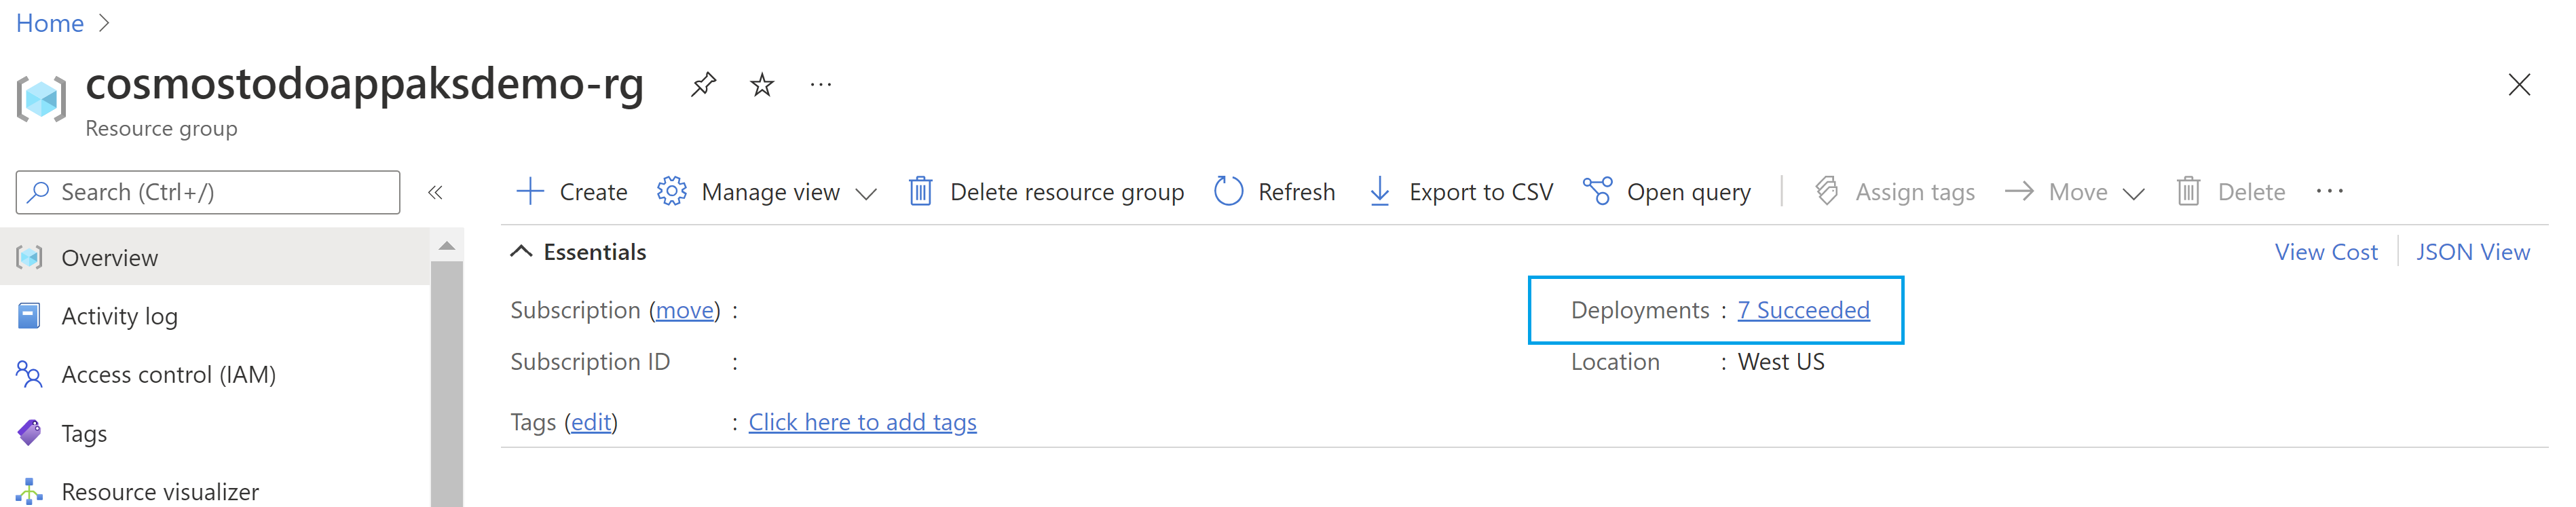 Screenshot of the deployment status for the resource group in the Azure portal.